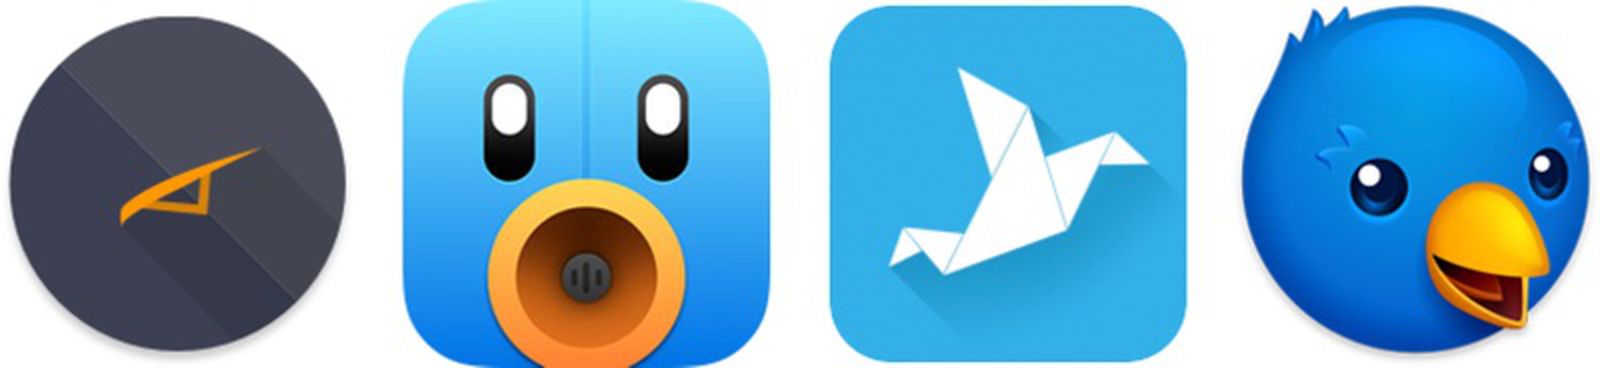 Upcoming Twitter Changes To Disable Key Features In Third Party Apps Updated Macrumors